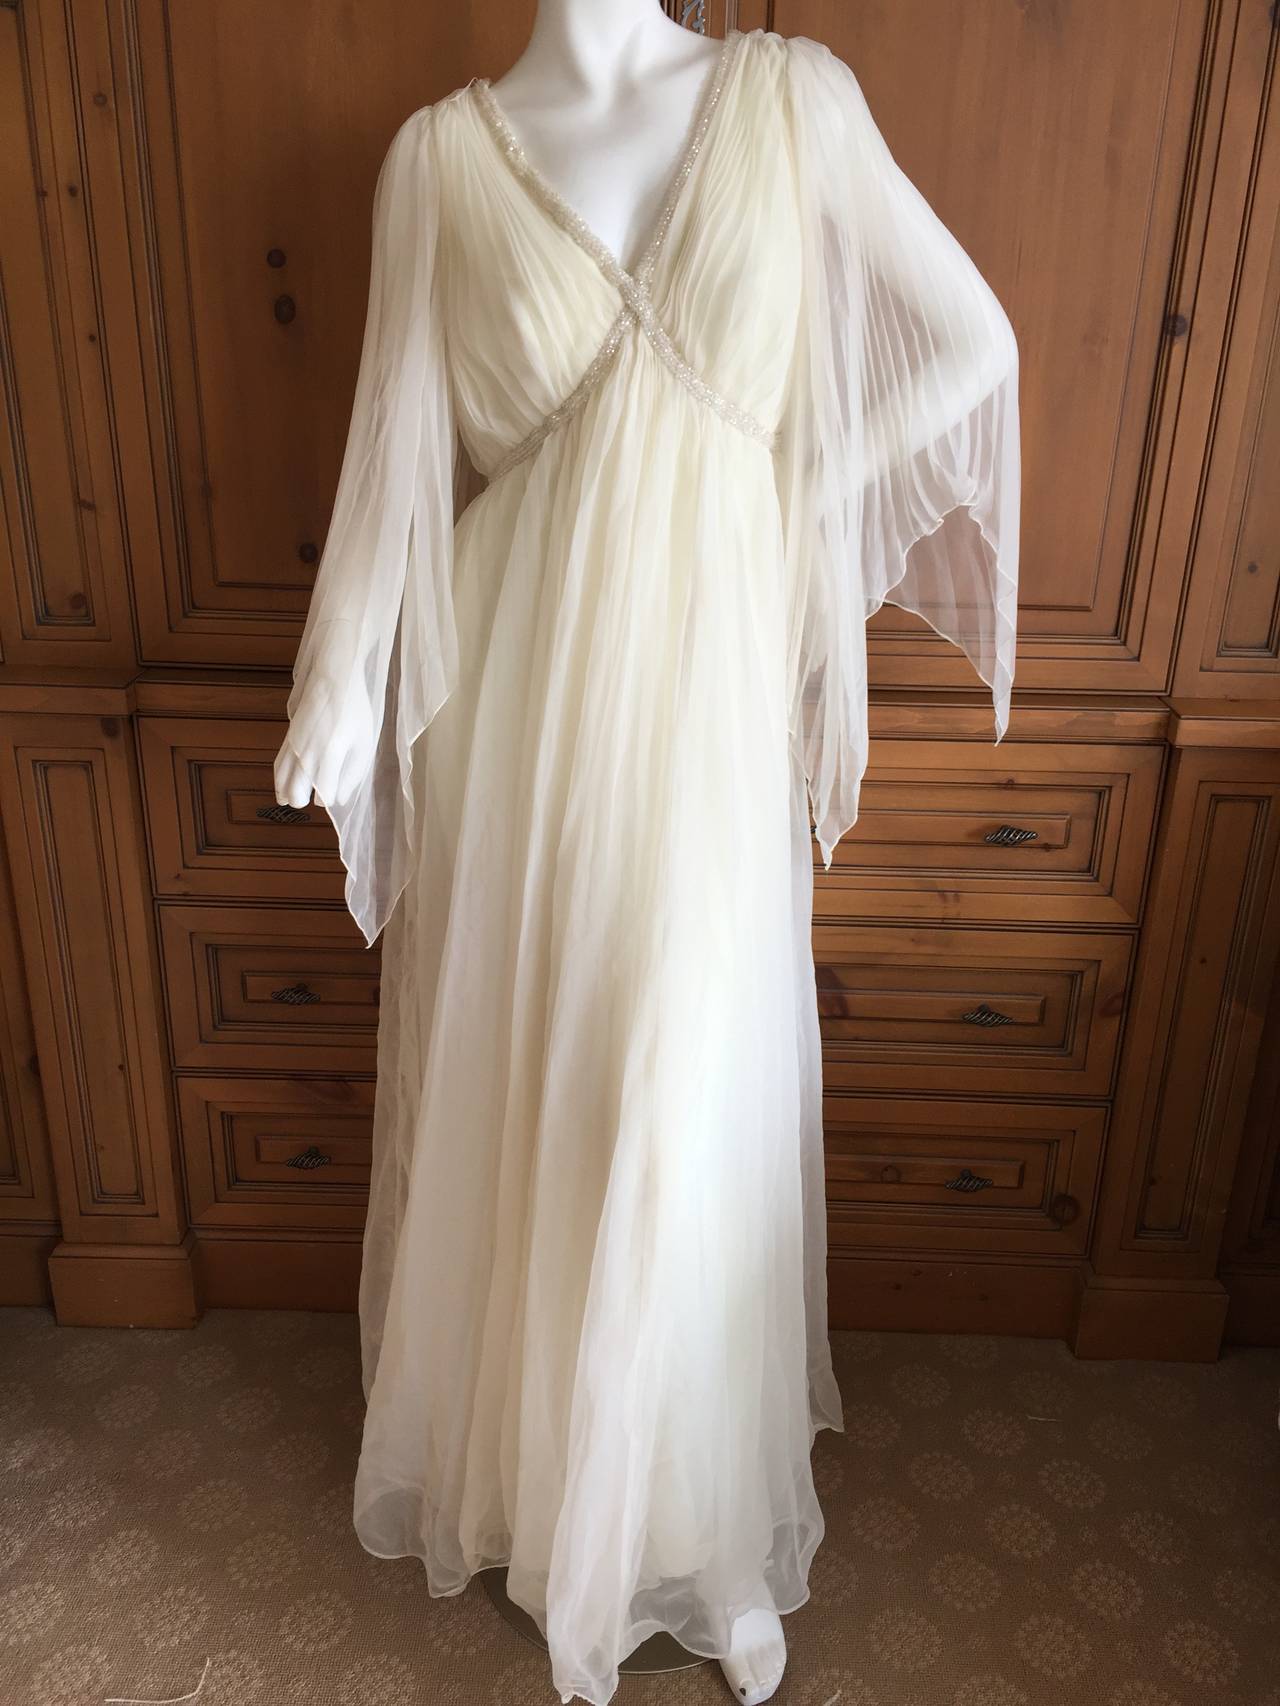 Jean Louis romantic bohemian ivory dress.
Beaded along the bust with wonderful sheer pleated wing like sleeves.
Very Florence Welsh , Aunty Mame , Lucille Ball and Andora all rolled into one knock out evening dress.
Jean Louis was one of the